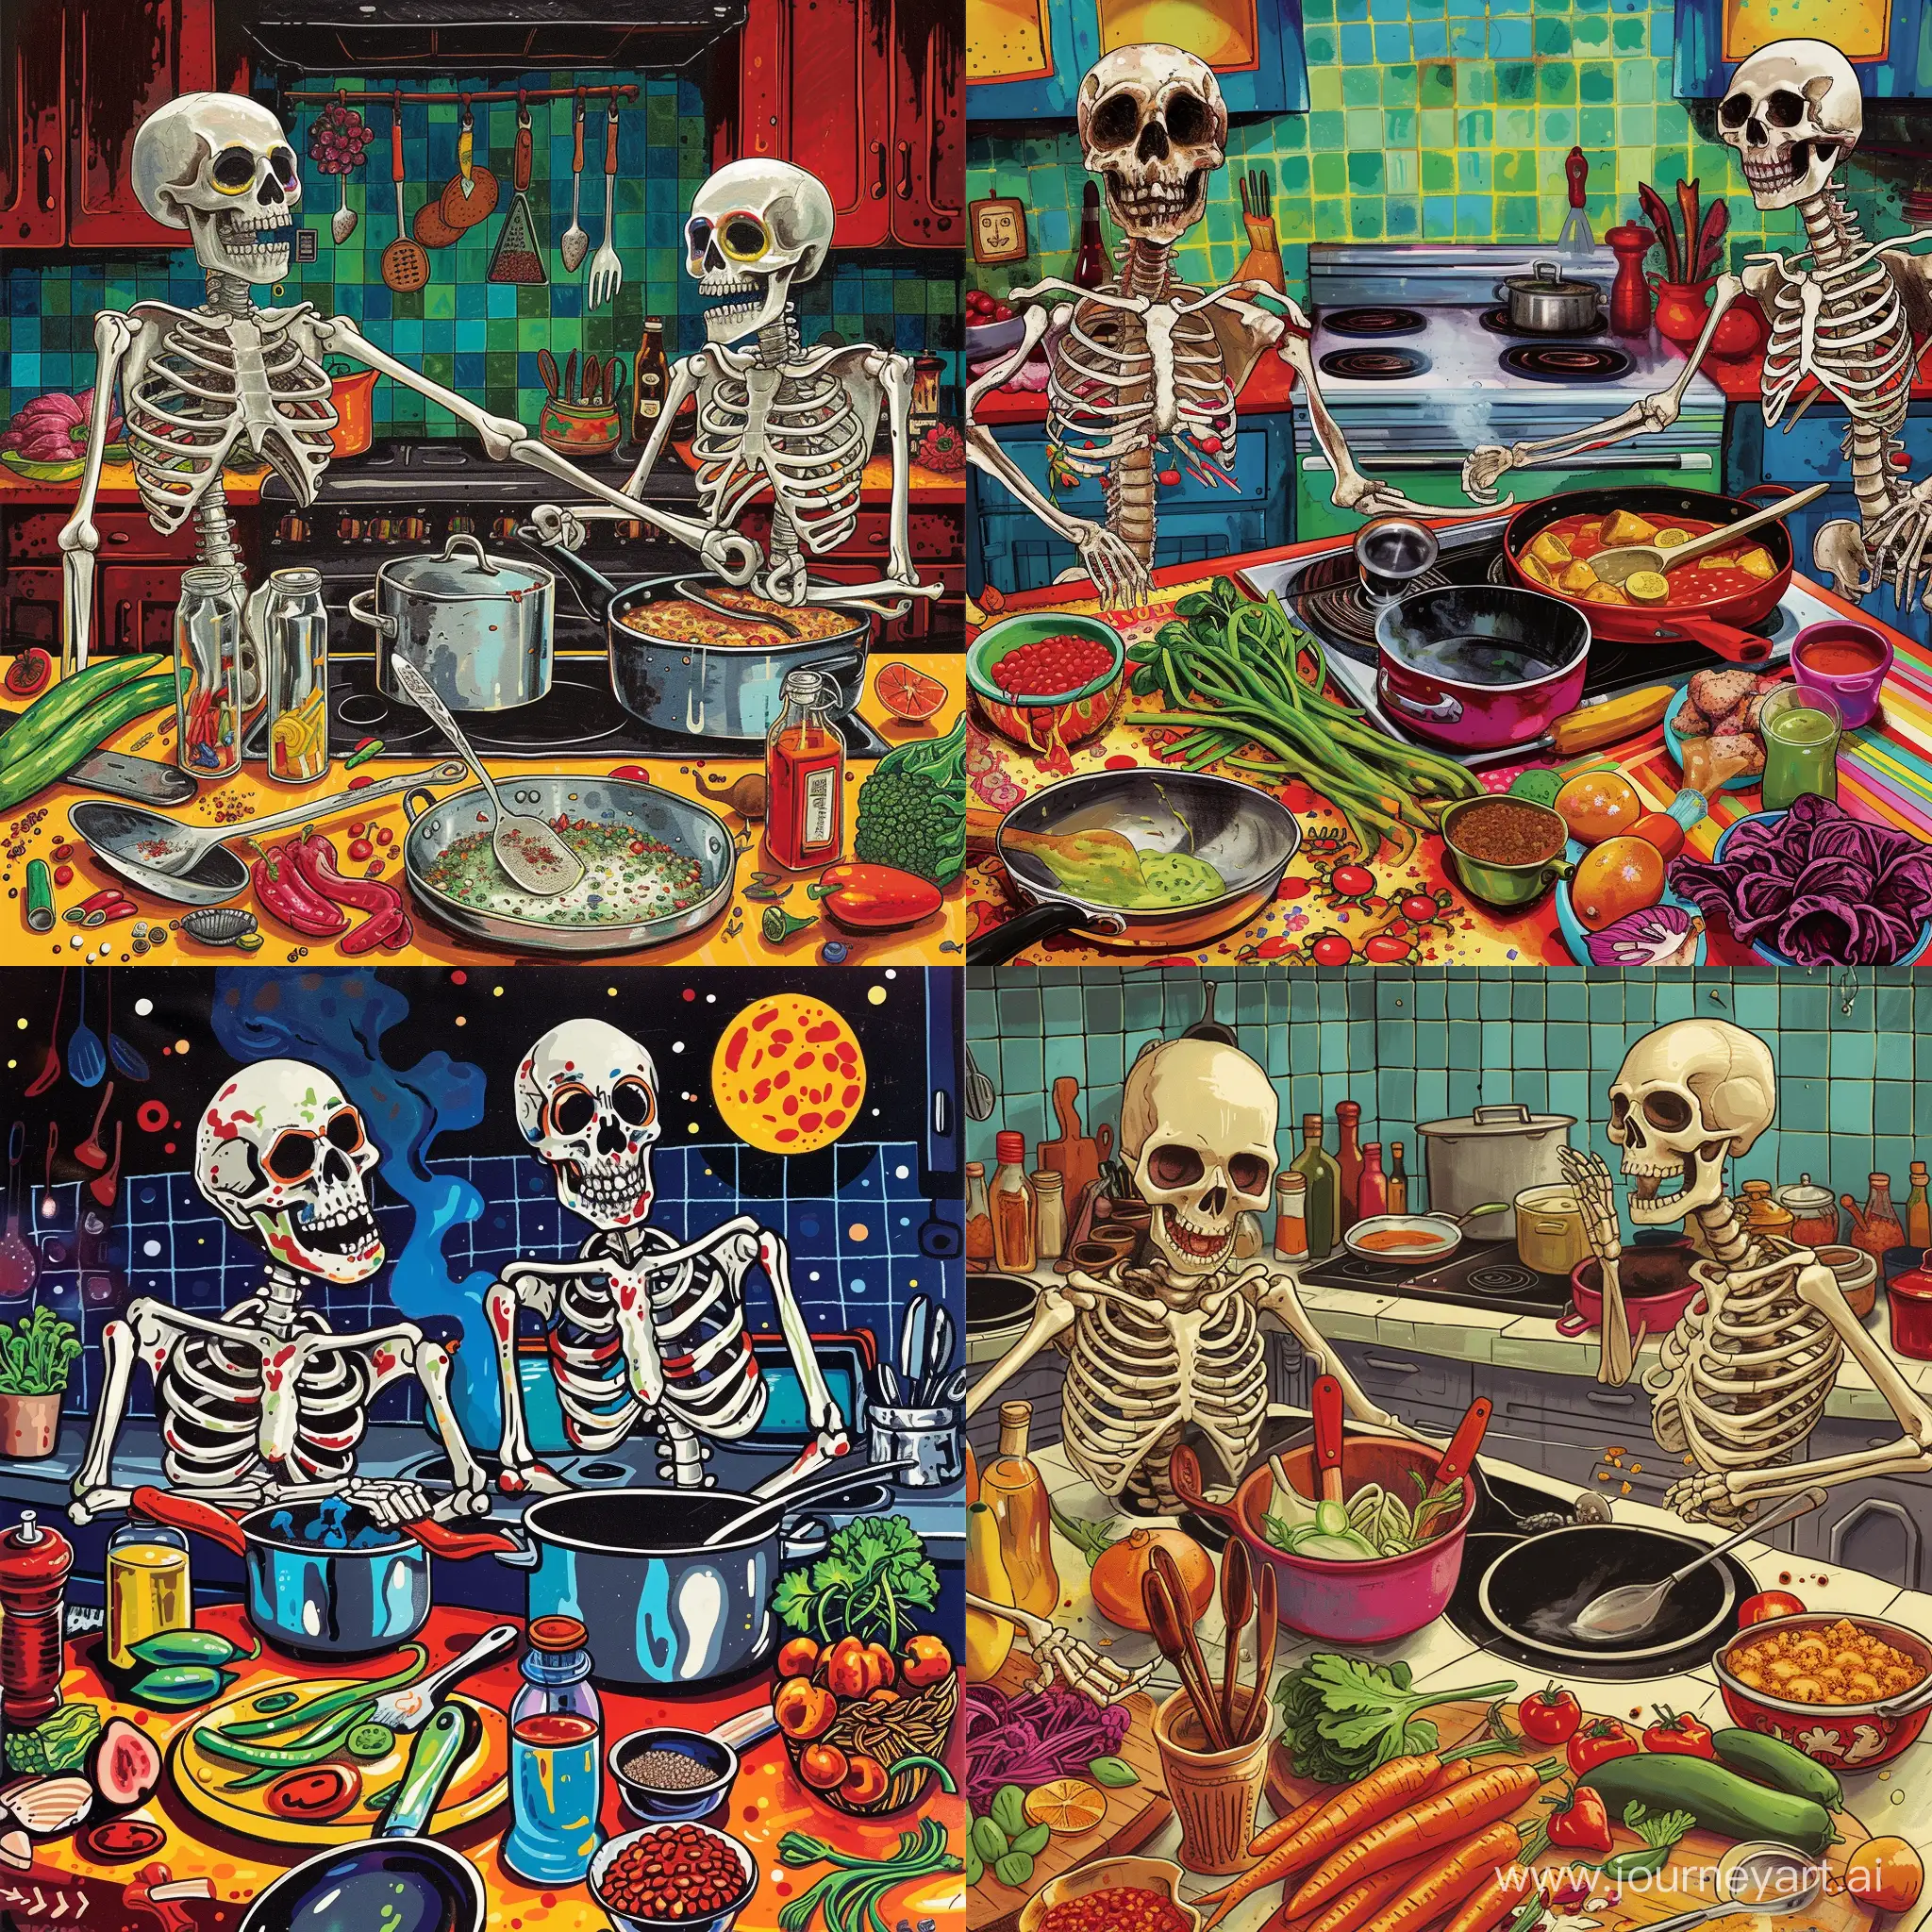 Vibrant-Skeletons-Cooking-Up-a-Culinary-Storm-in-Colorful-Kitchen-Poster